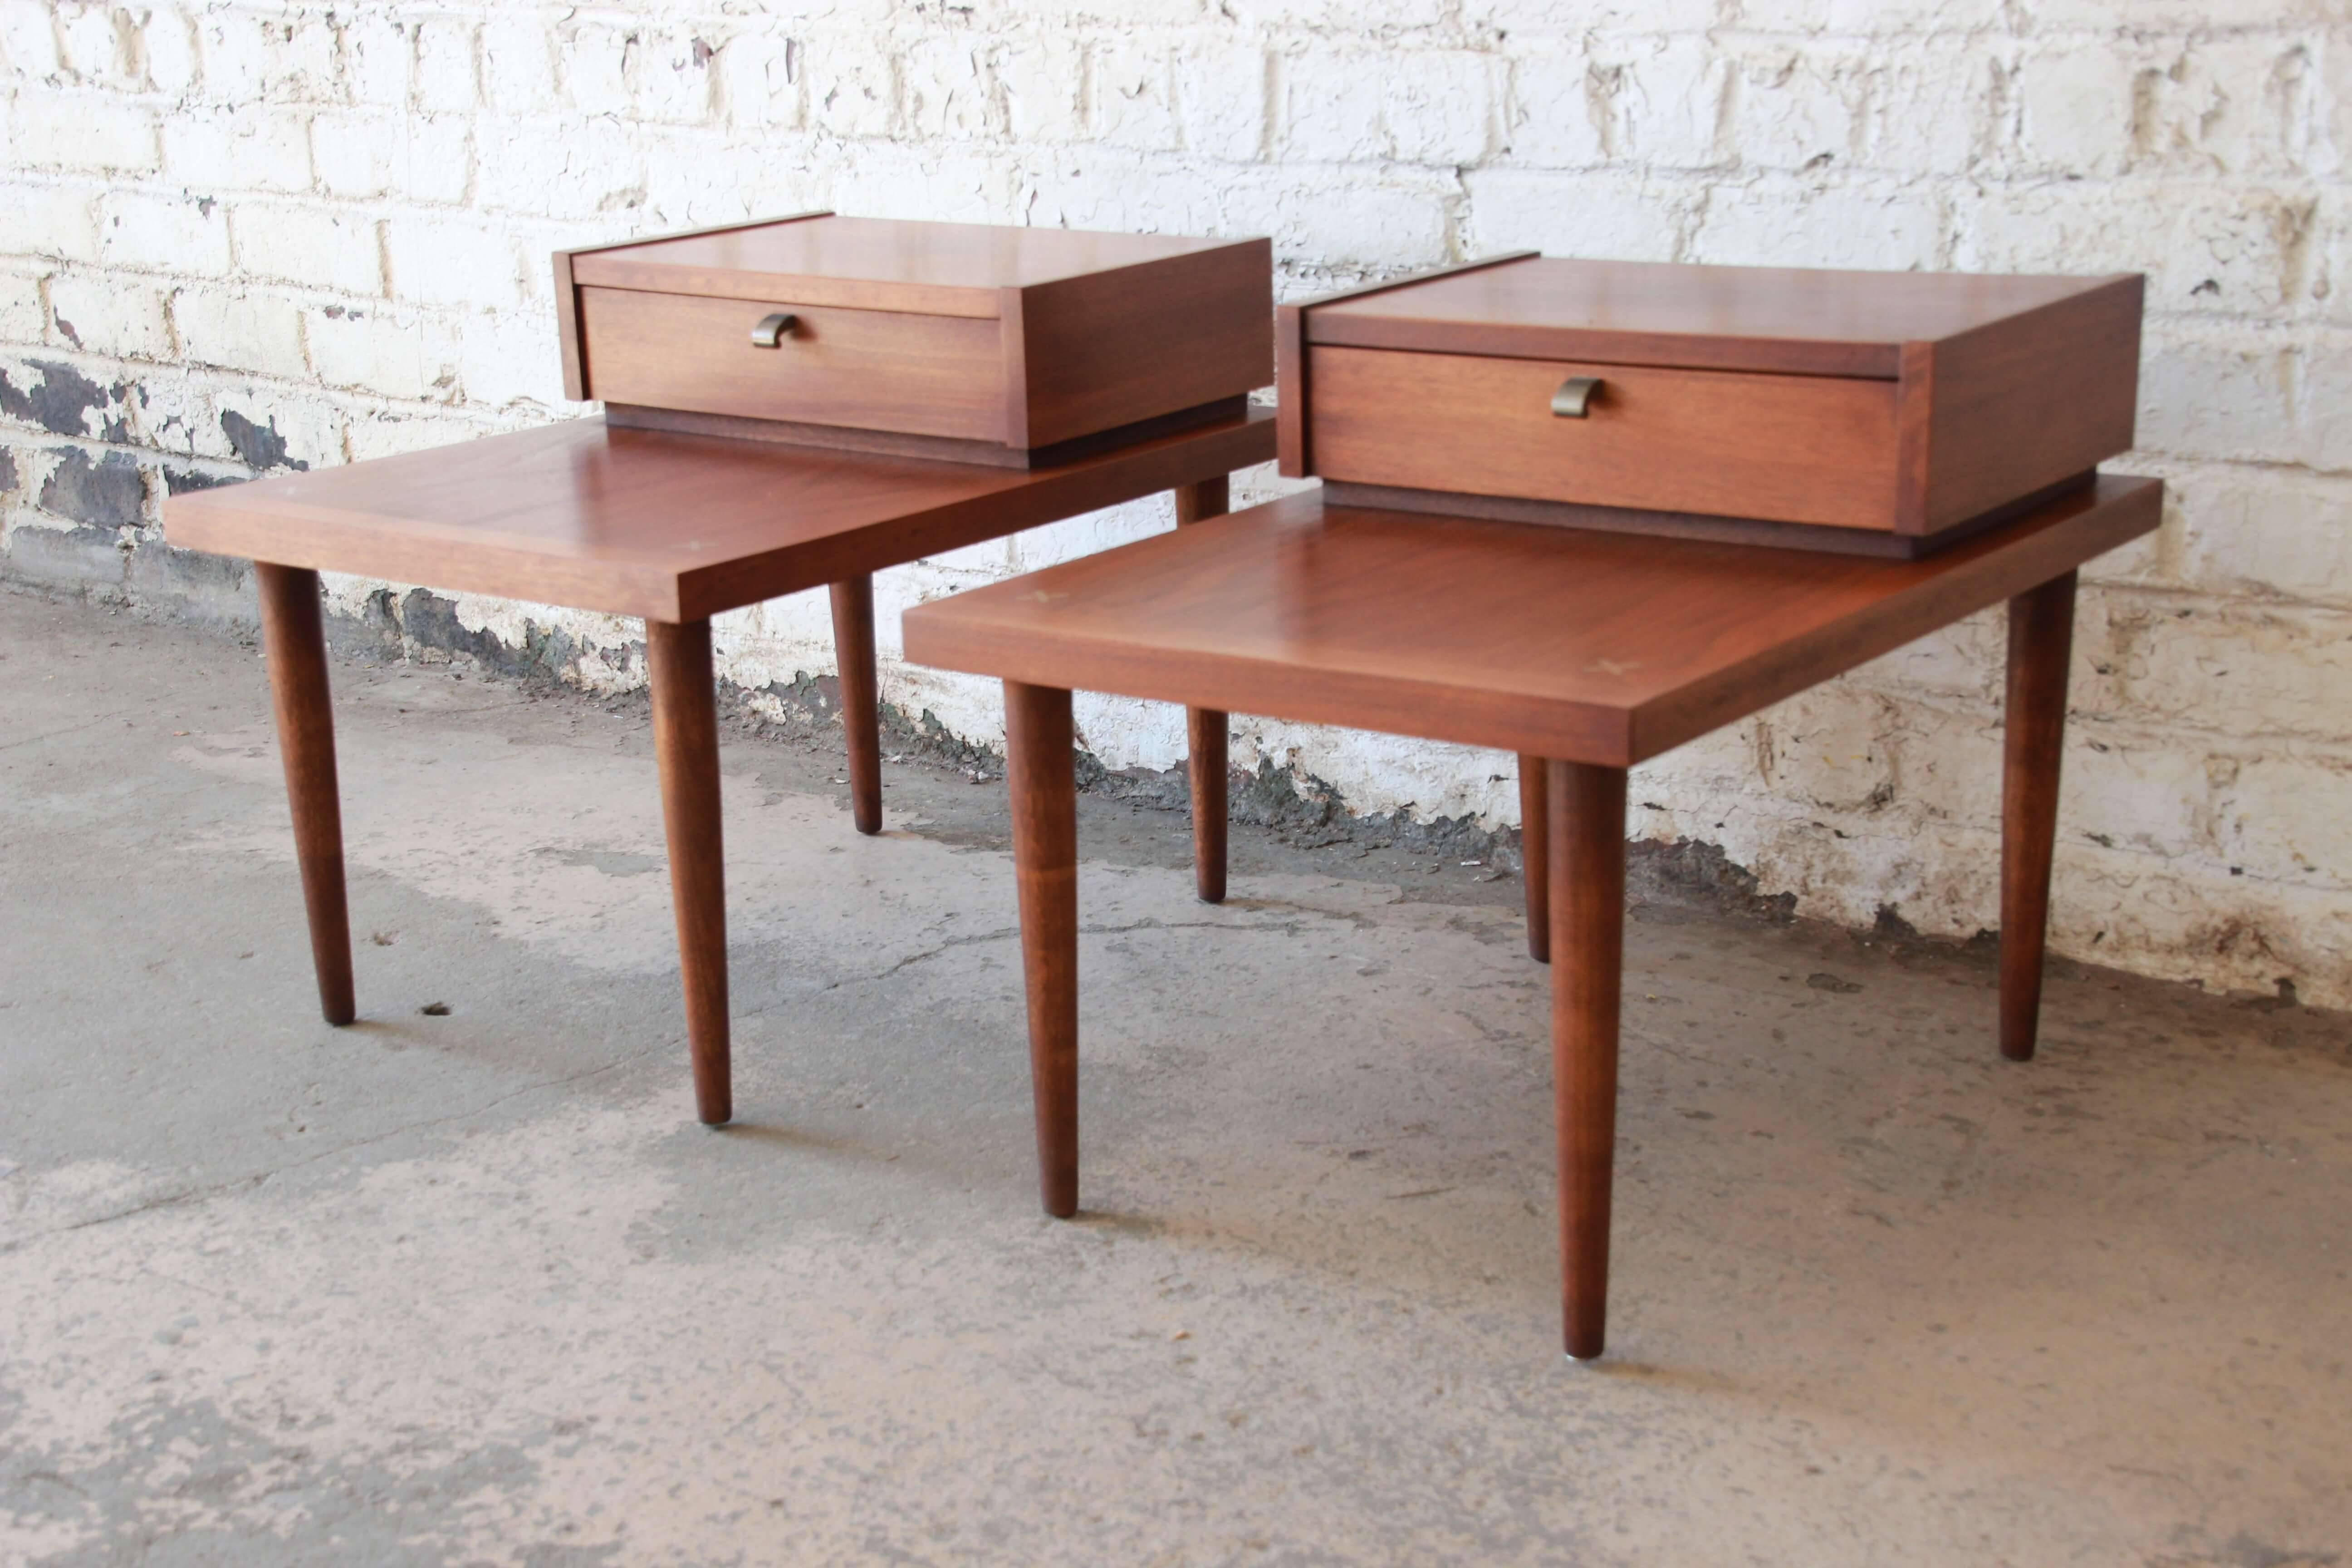 Offering a very nice pair of Mid-Century Modern end table or nightstands by Merton Gershun for American of Martinsville. The tables are in original condition with brass inlaid details and unique pulls. The step end design has a low profile version